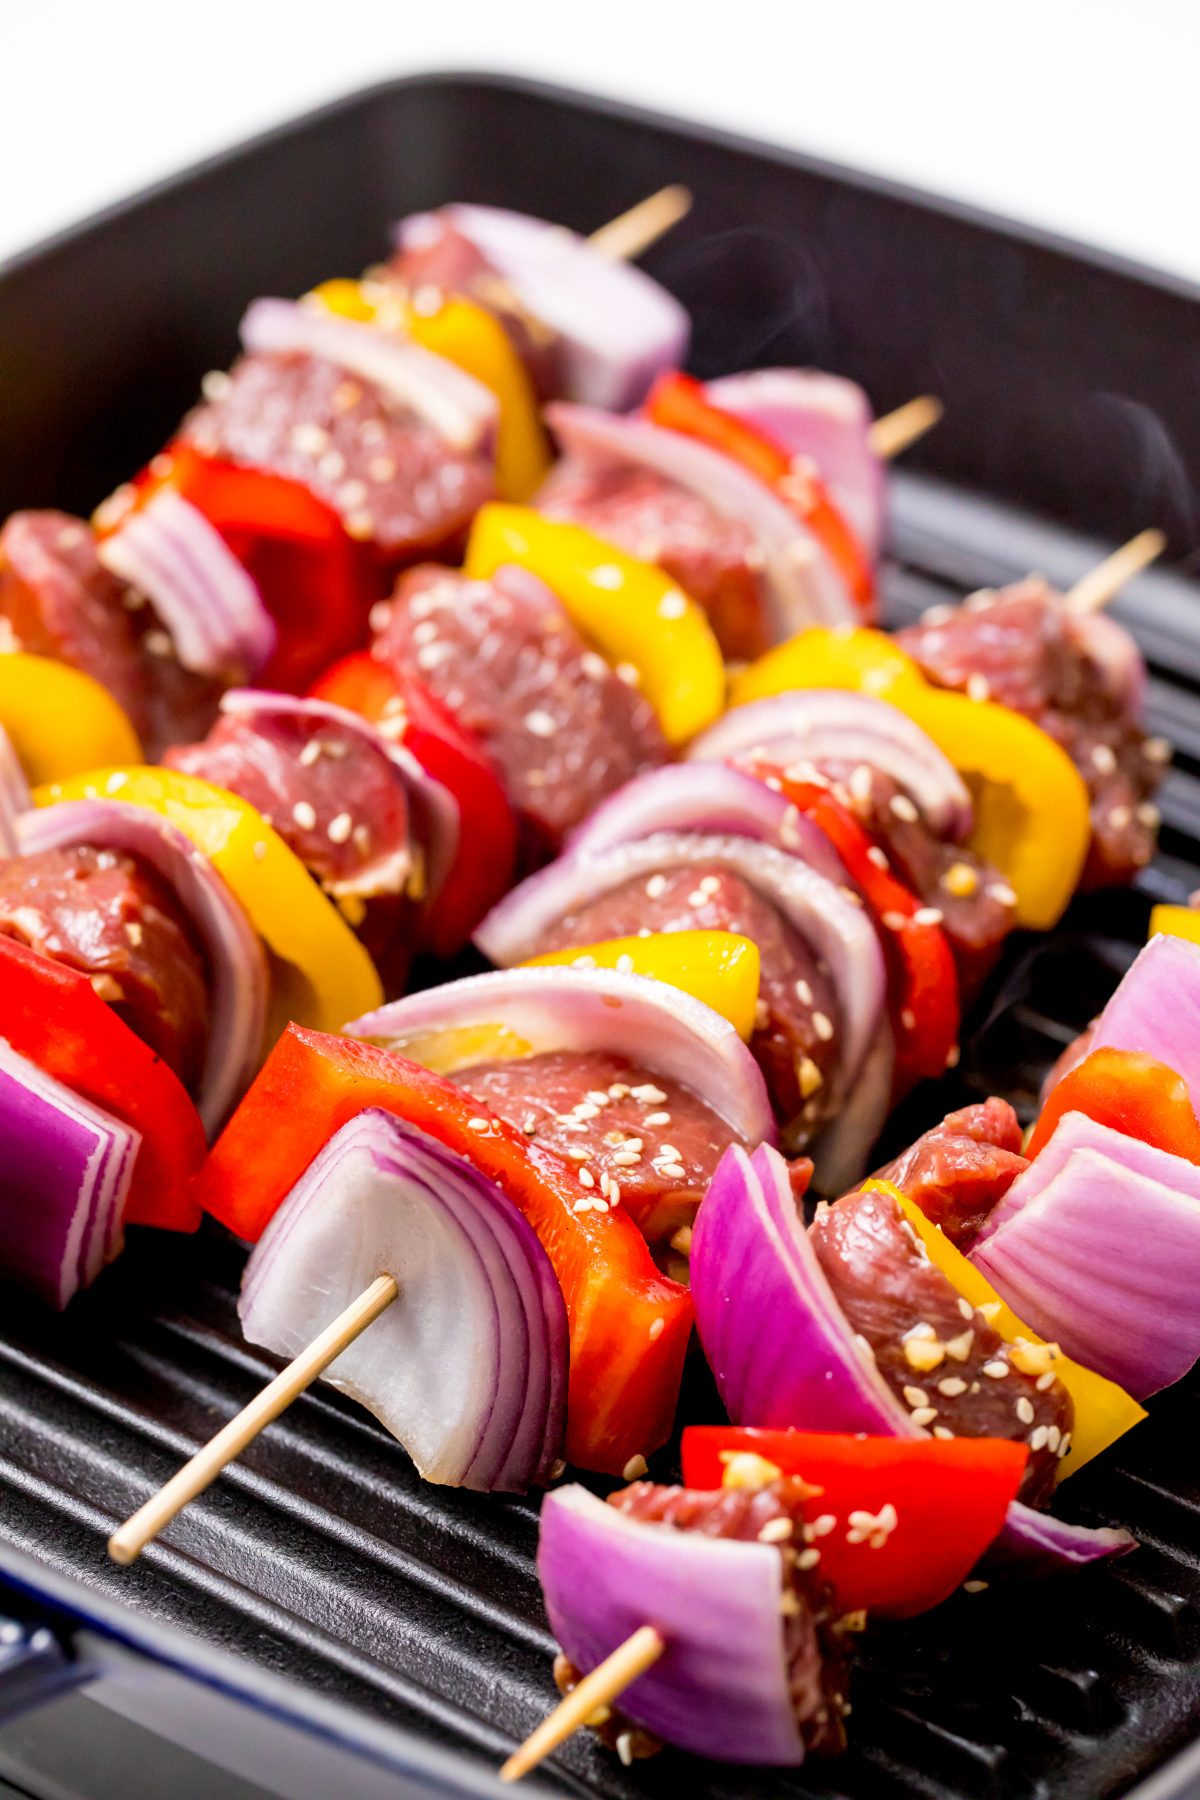 Allow kabobs to cook on the grill